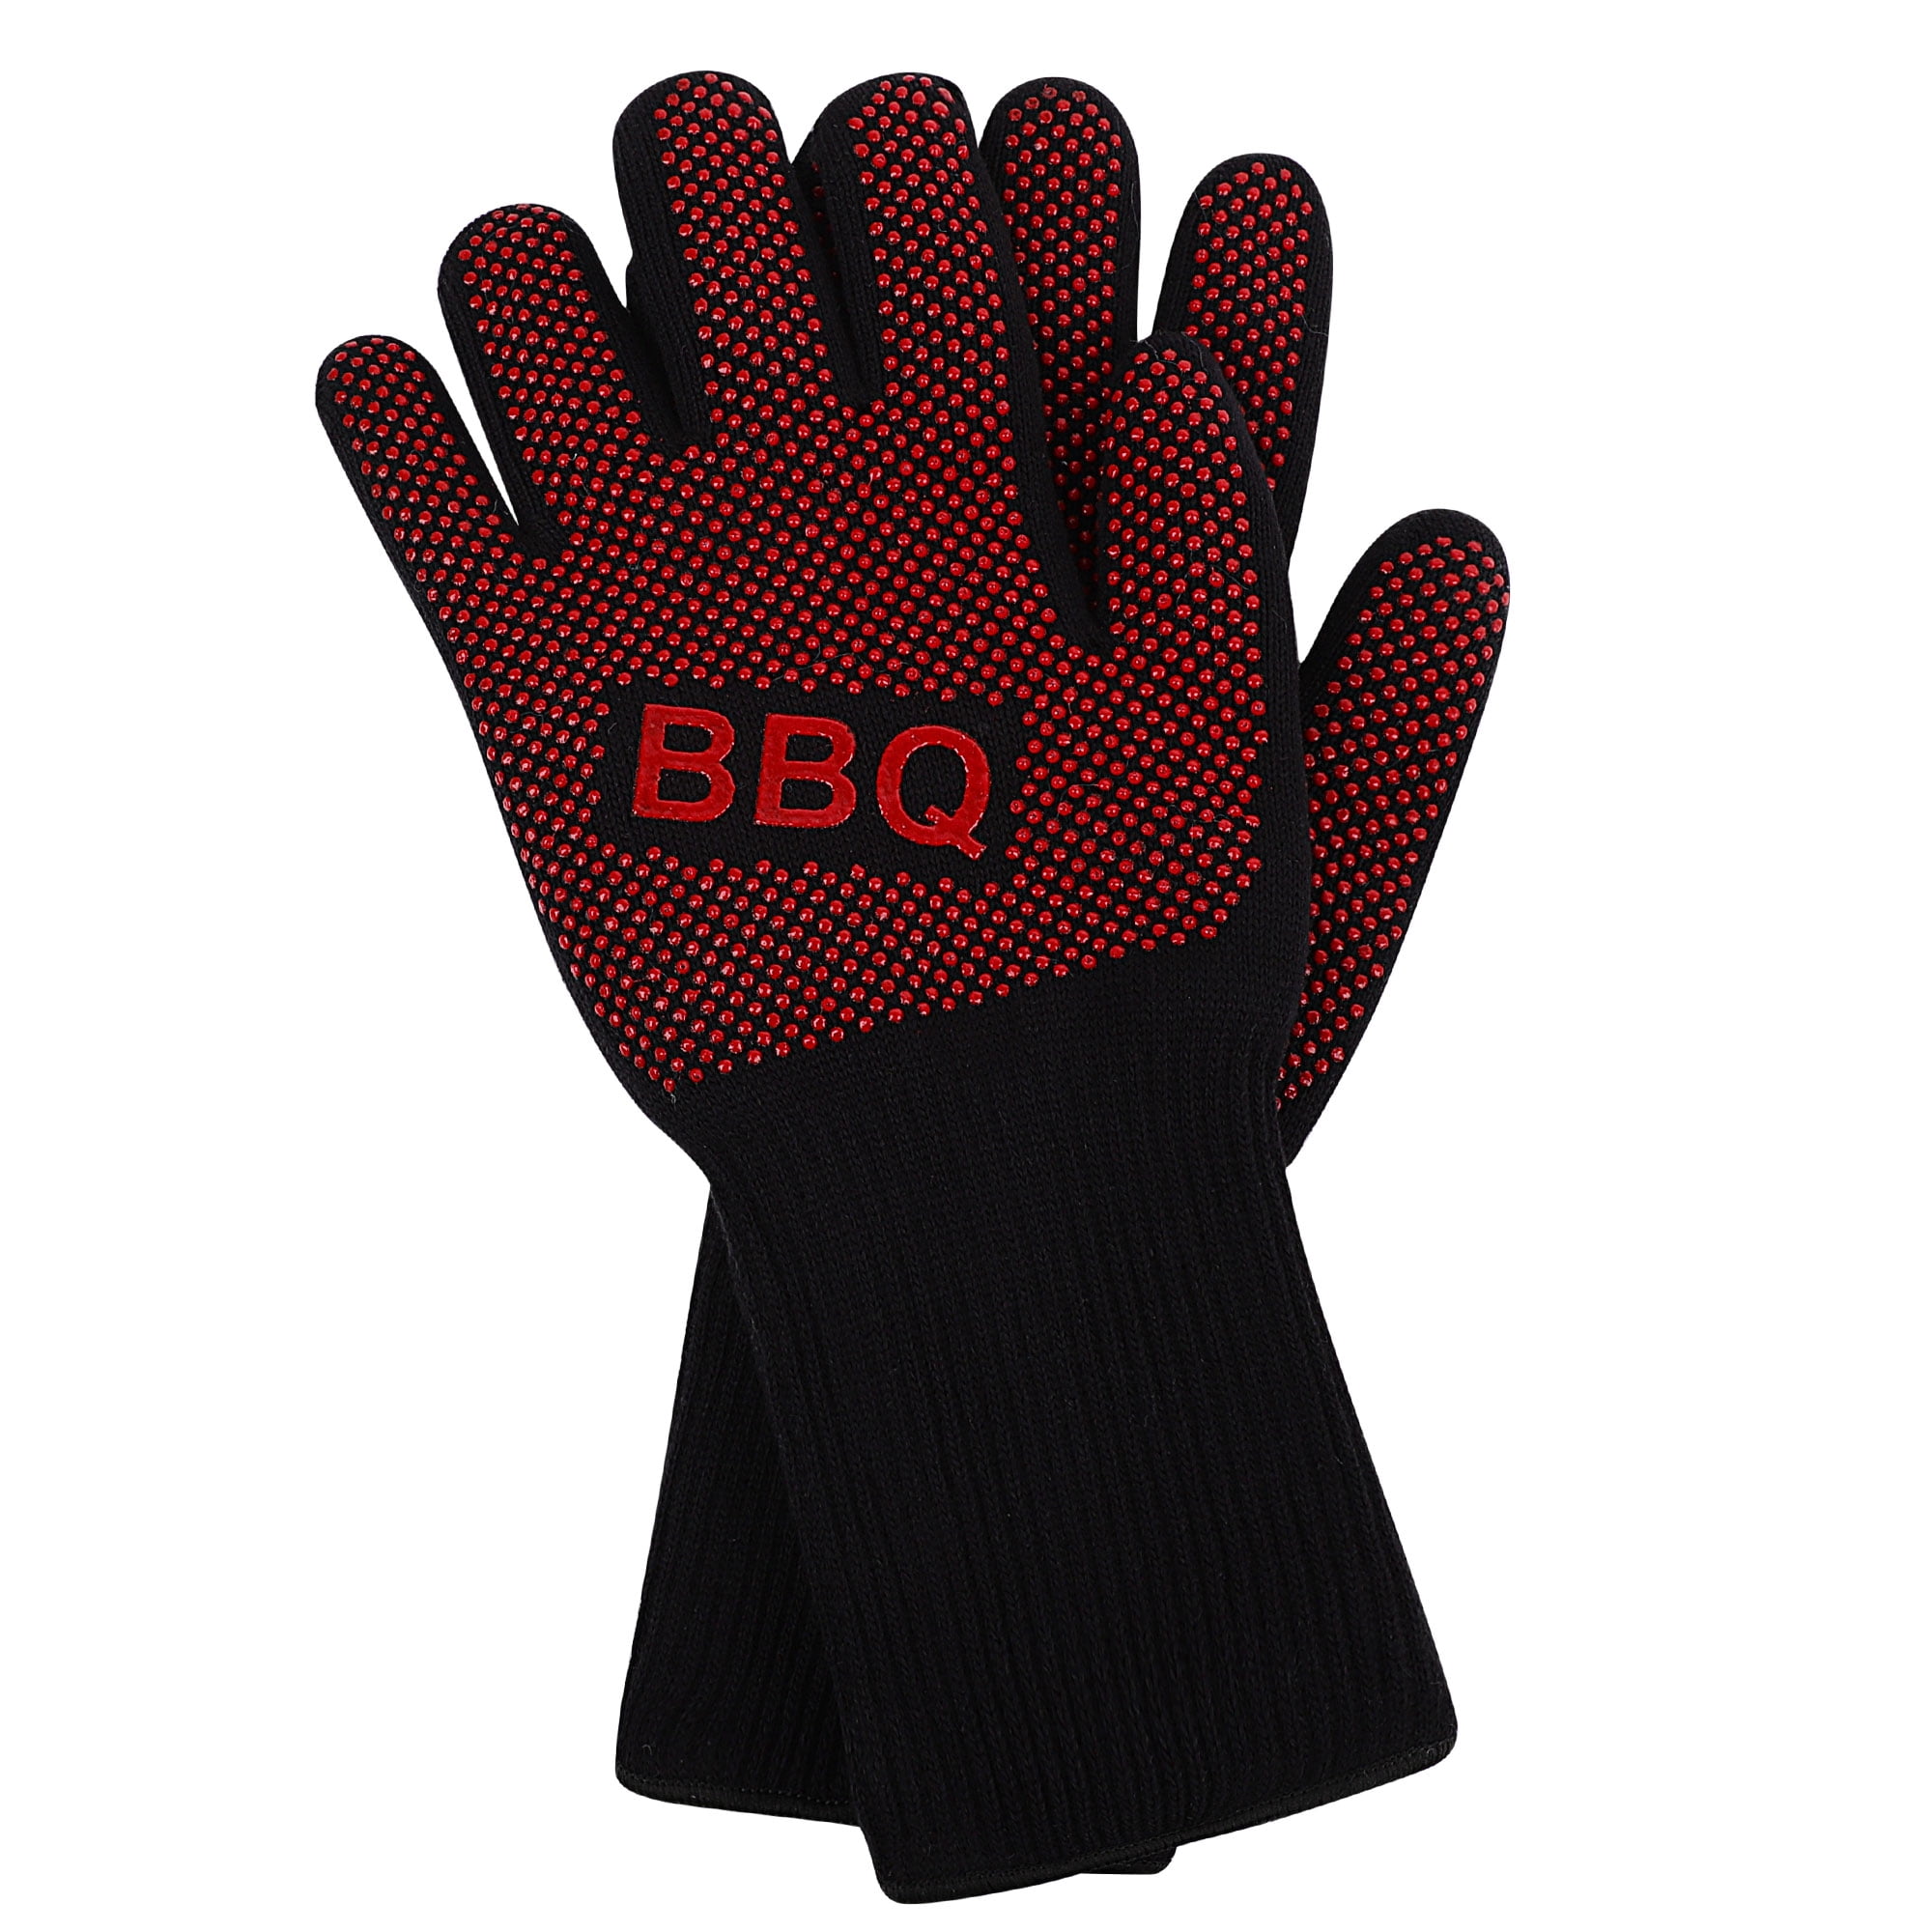 Multi-Purpose Silicone Gloves for Kitchen Cooking: Heat Resistant,  Waterproof, and Non-Slip for BBQ, Grill, Microwave, Oven, and Baking